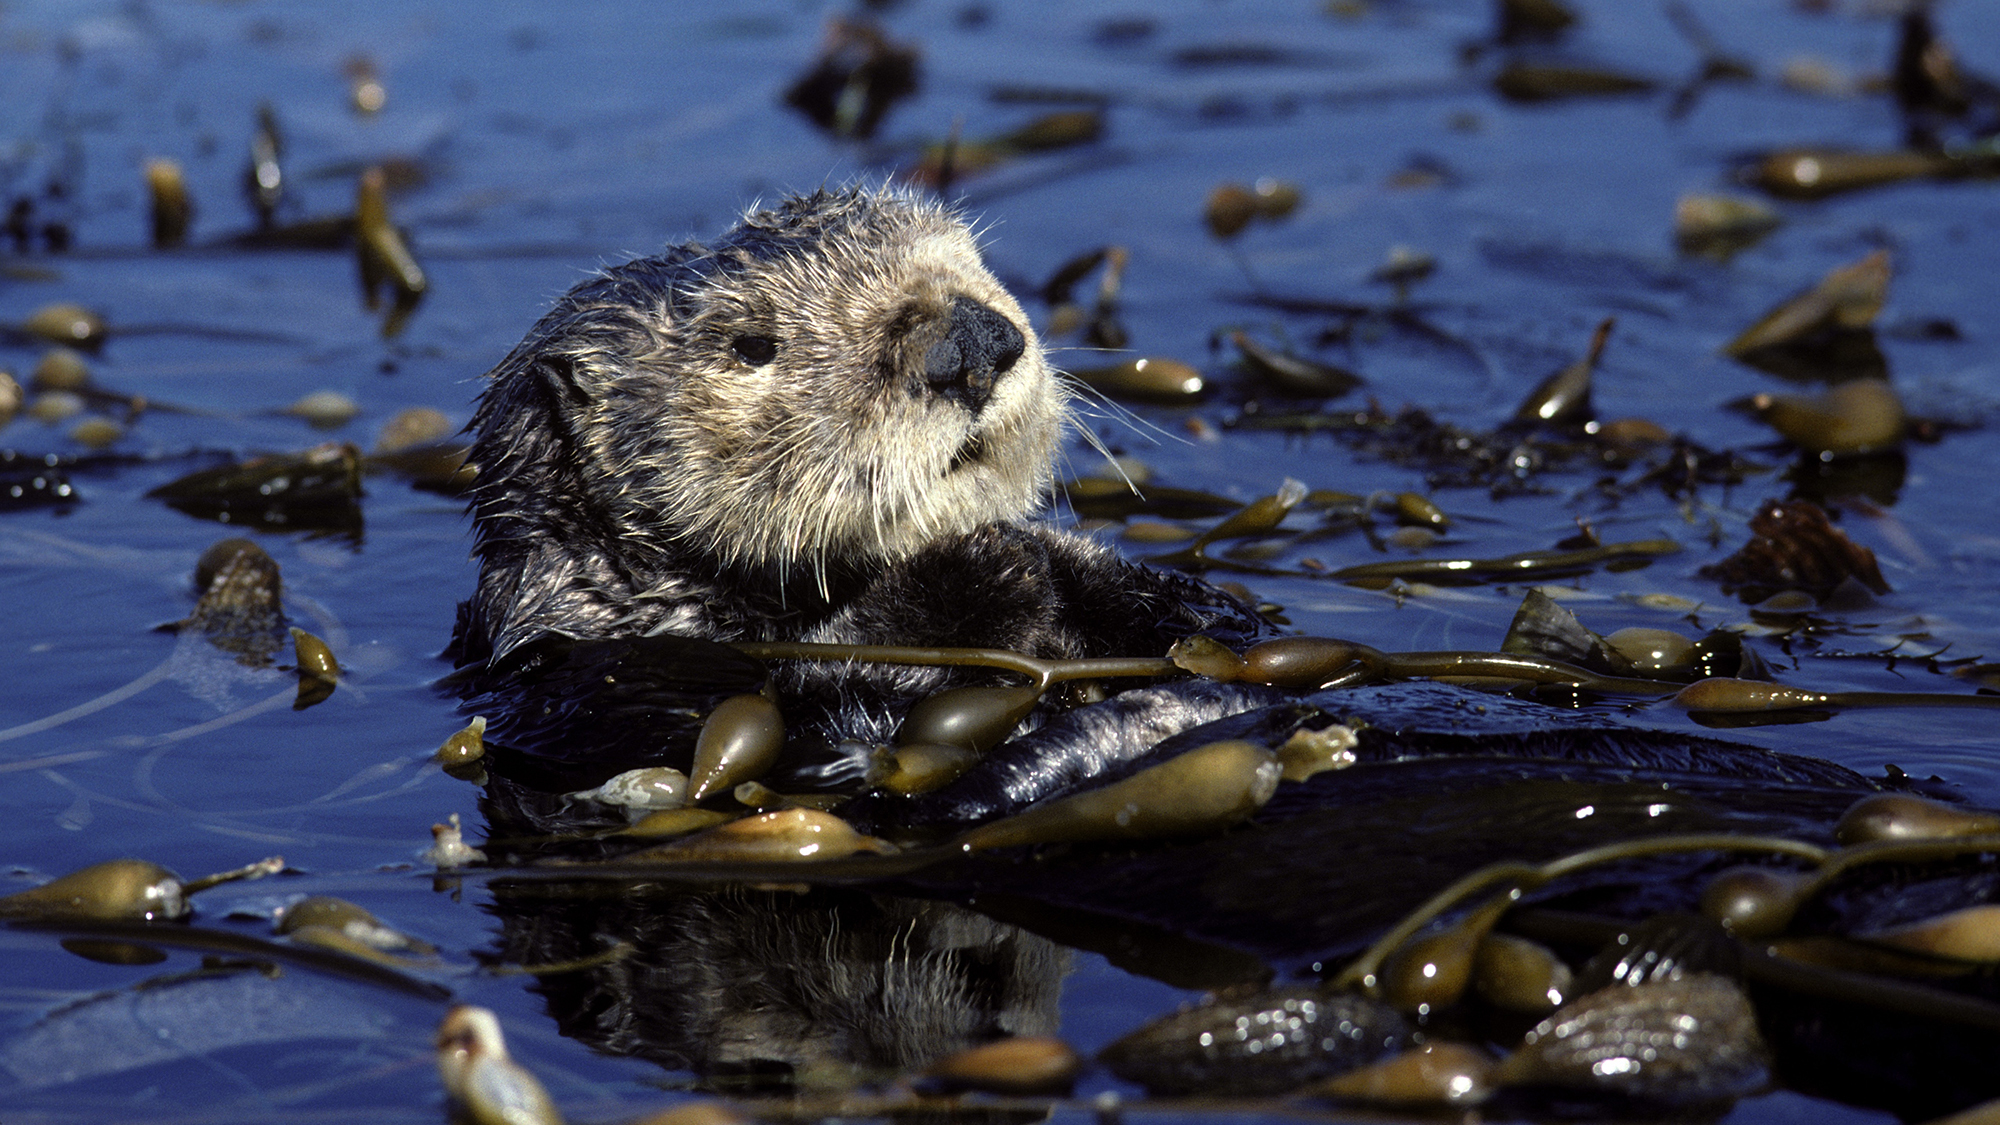 A sea otter resting in a kelp bed in Monterey Bay, California.